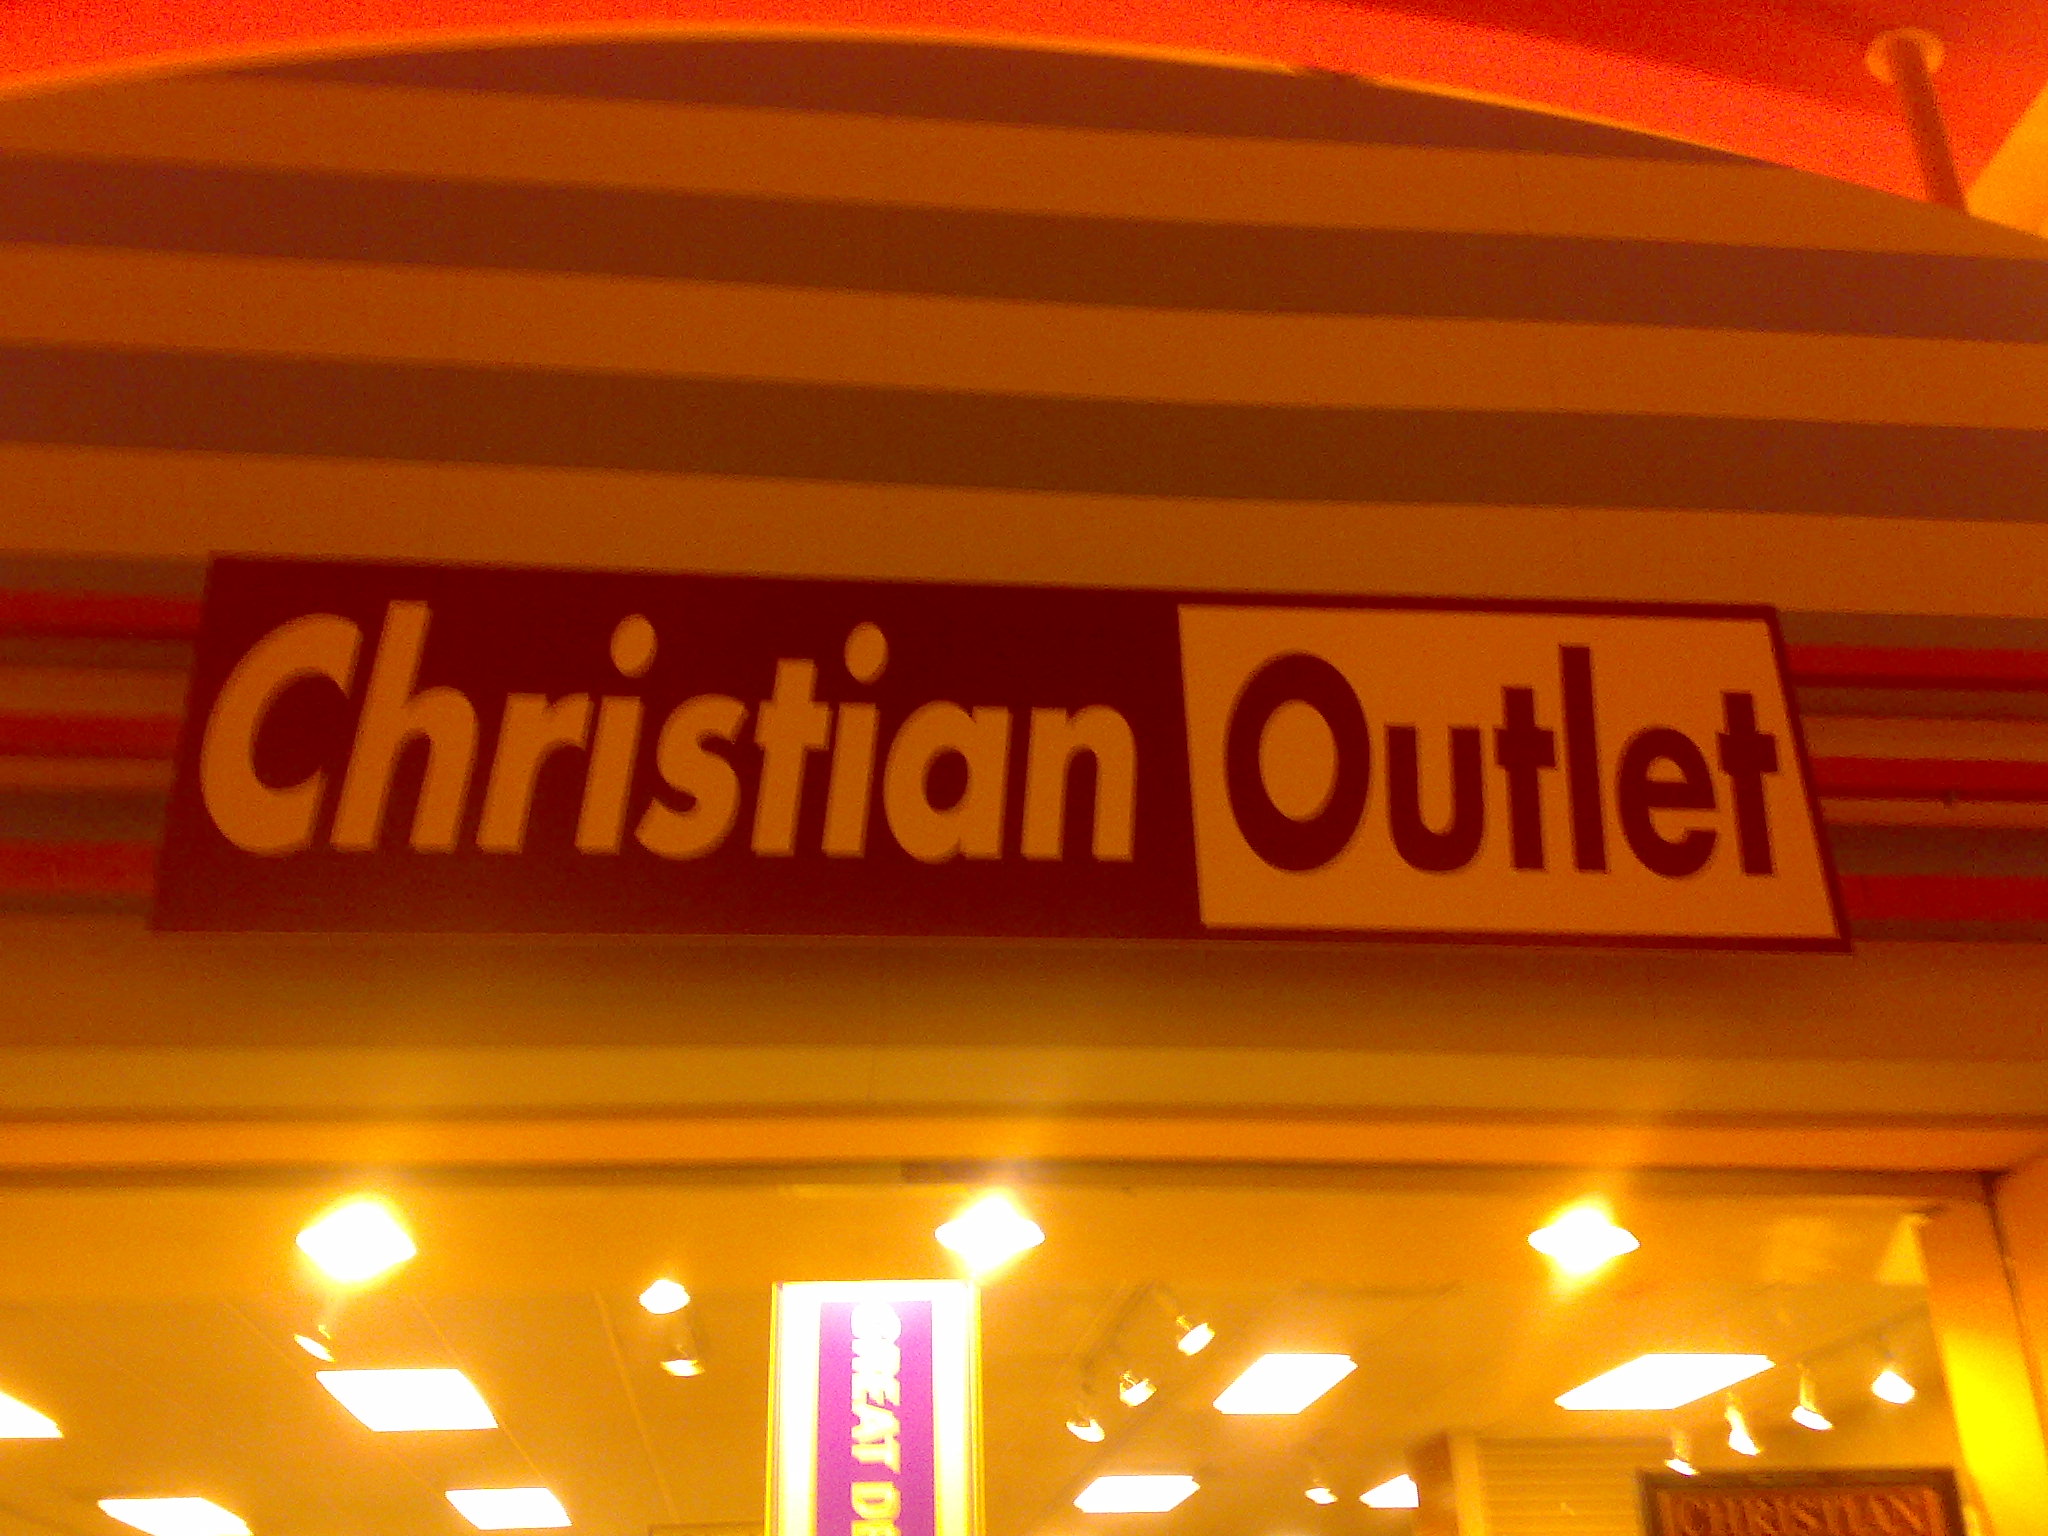 Christian Outlet